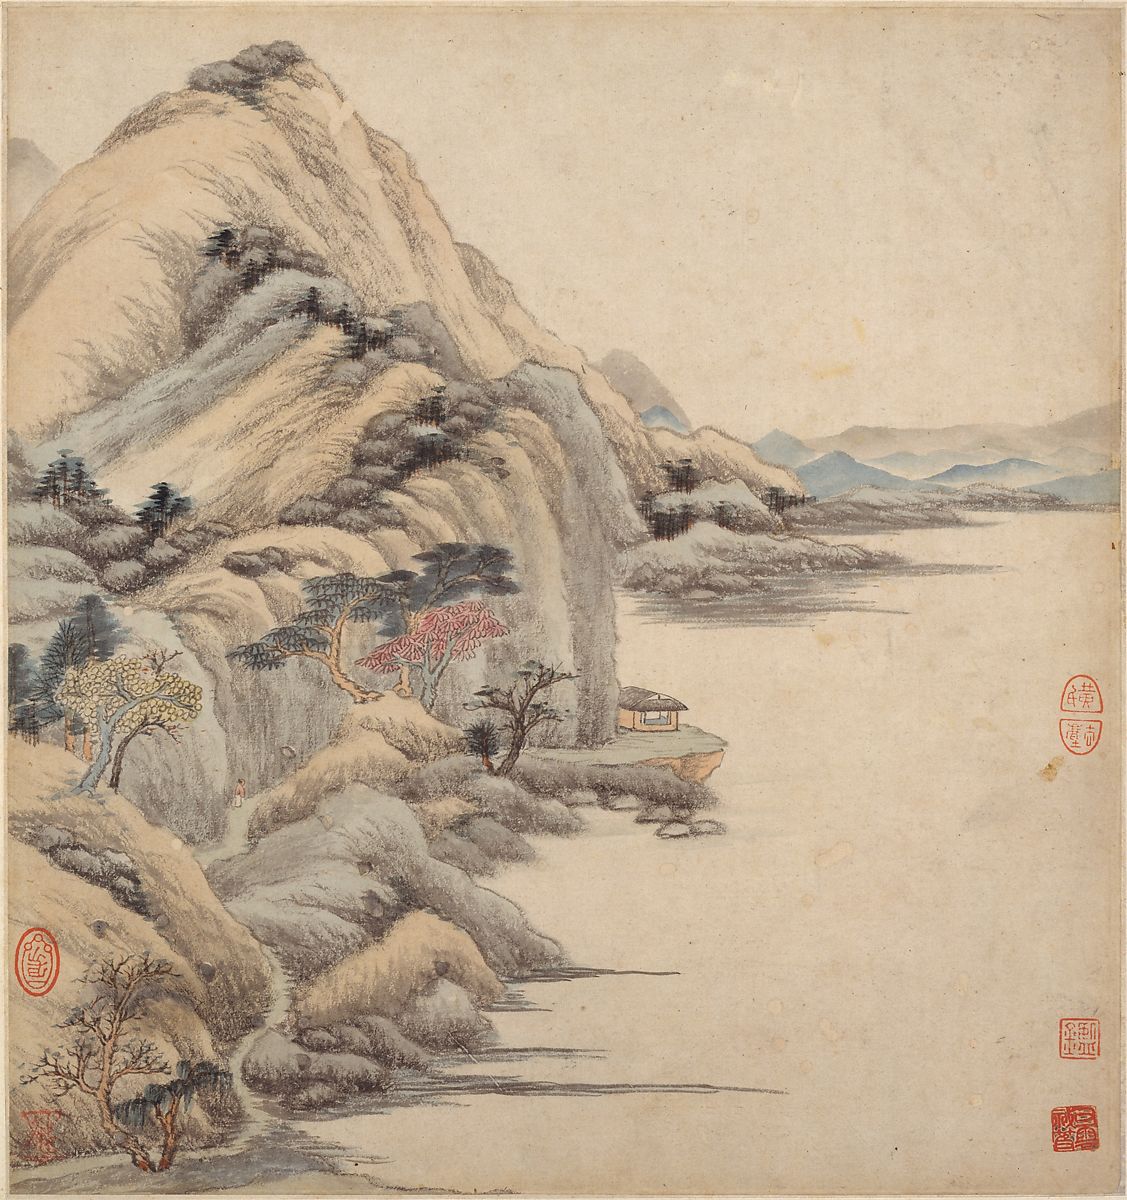 A mountain scene on the sea with a small house